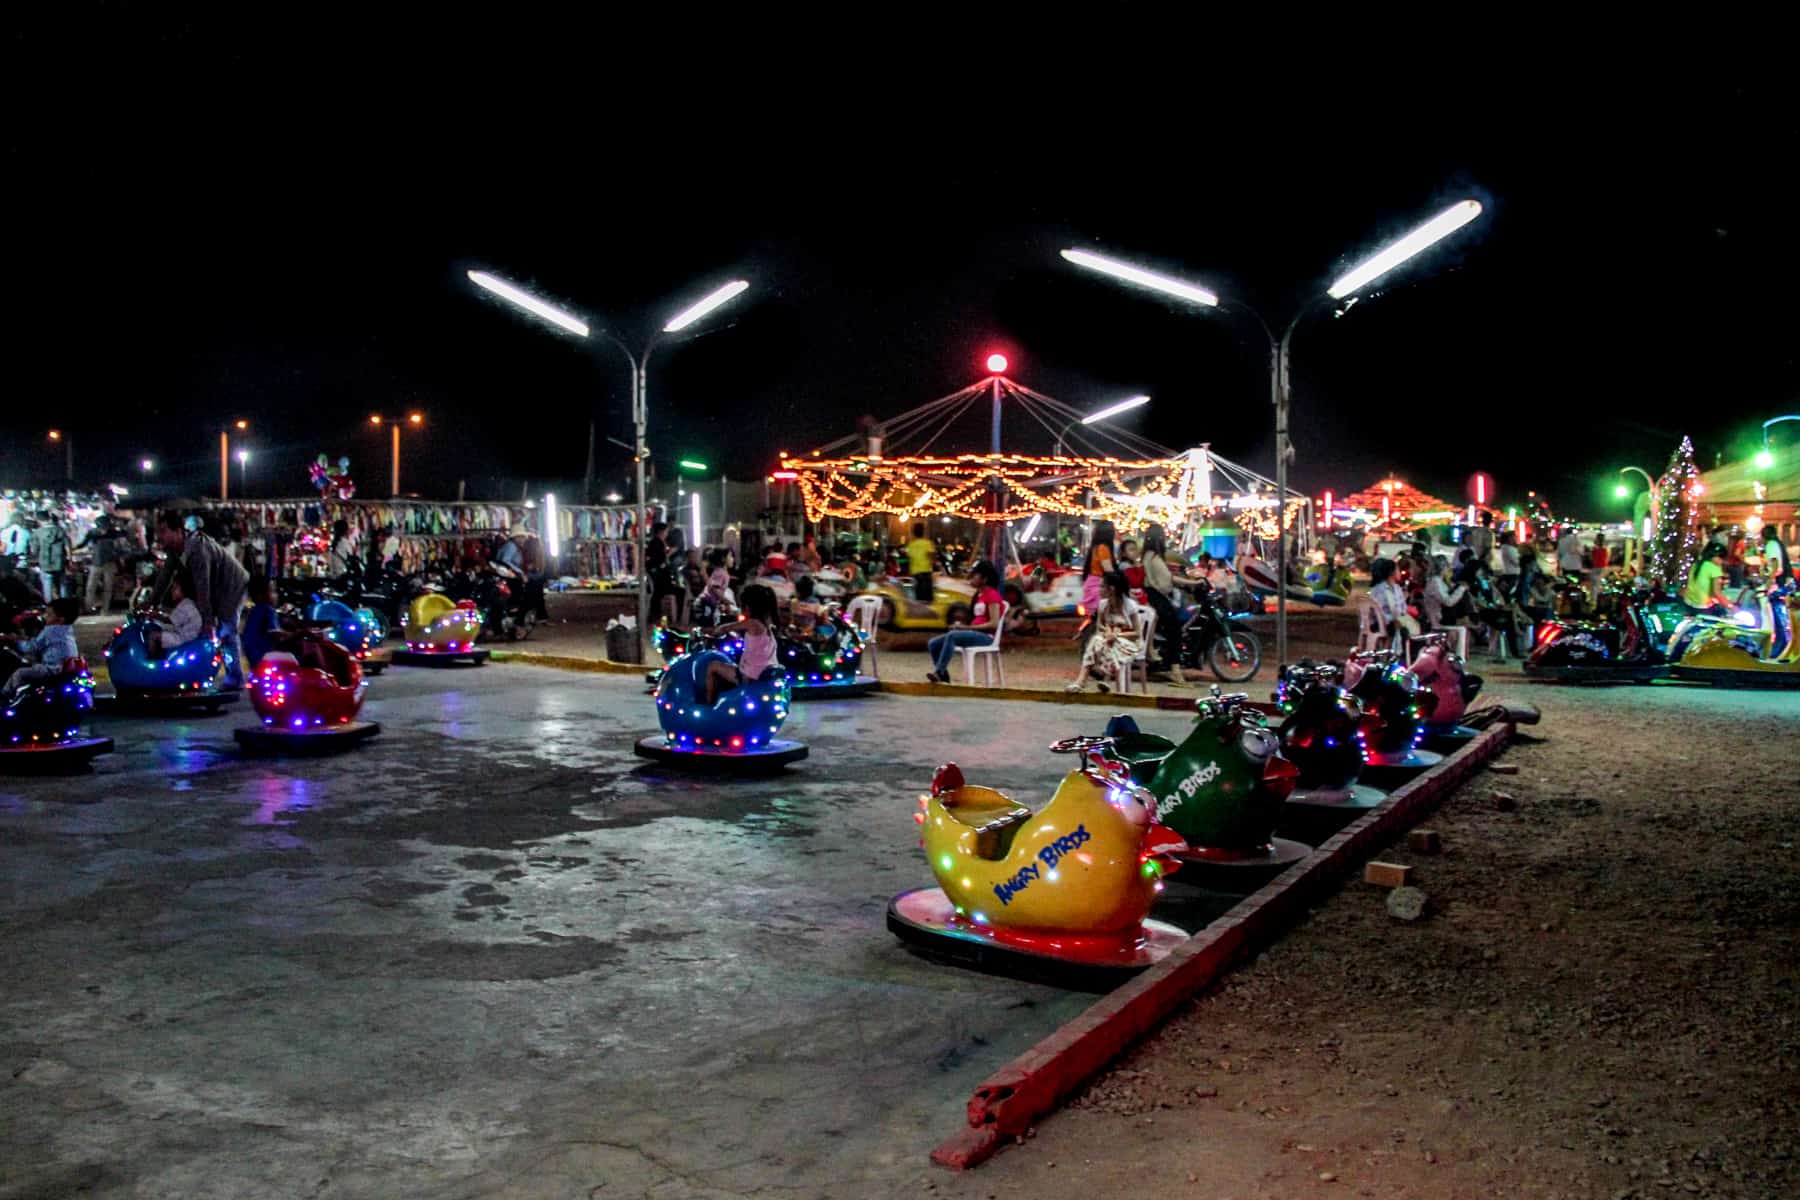 A fair ground scene at night with children's bumper cars in the foreground and merry-go-round rides in the background. 